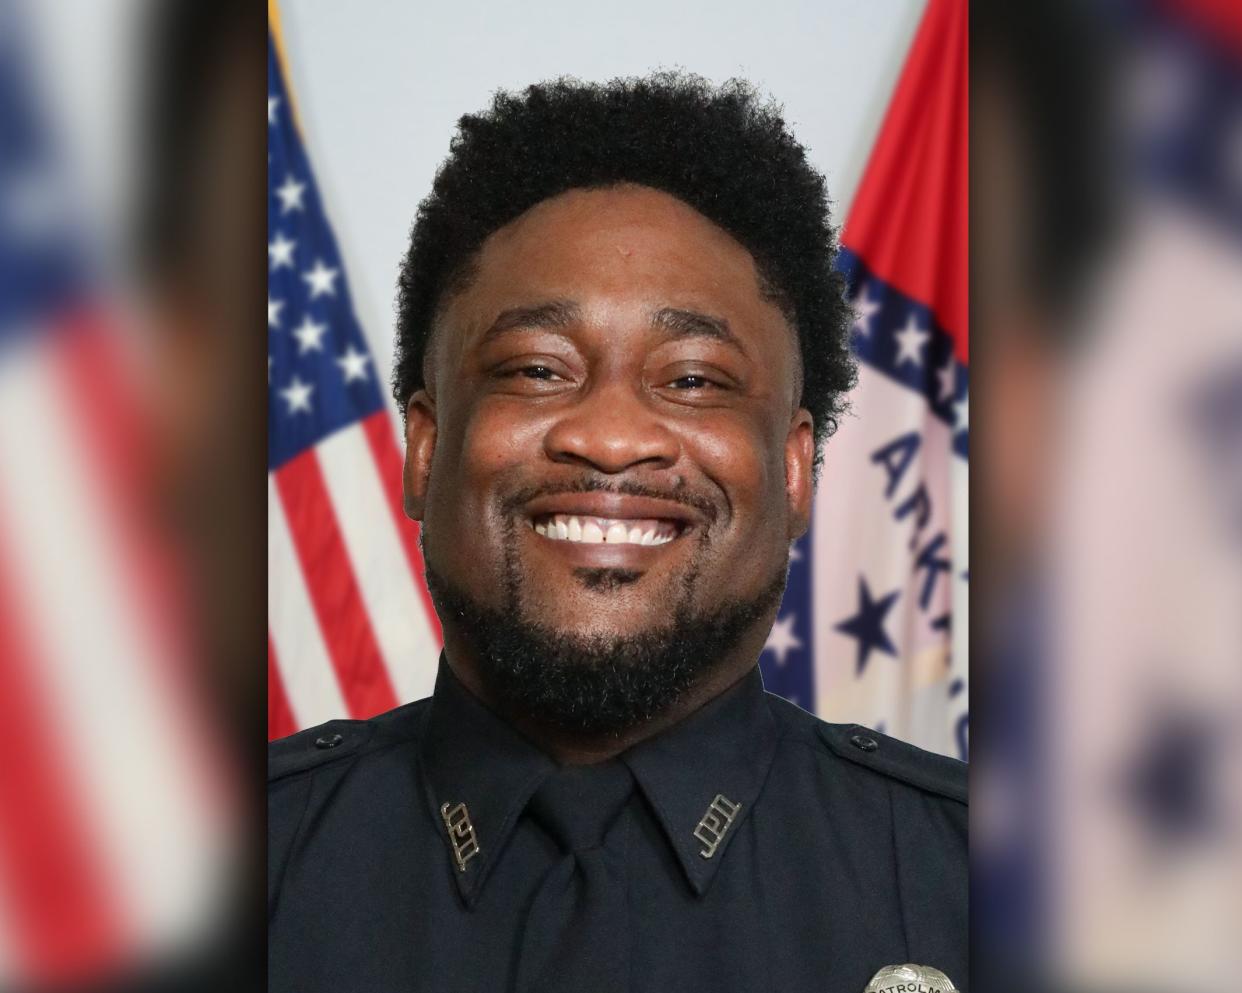 Vincent Parks, a 38-year-old member of the Jonesboro Police Department, died Sunday, July 17, 2022, after exhibiting “medical distress” during a training exercise just a few weeks after he joined the department.